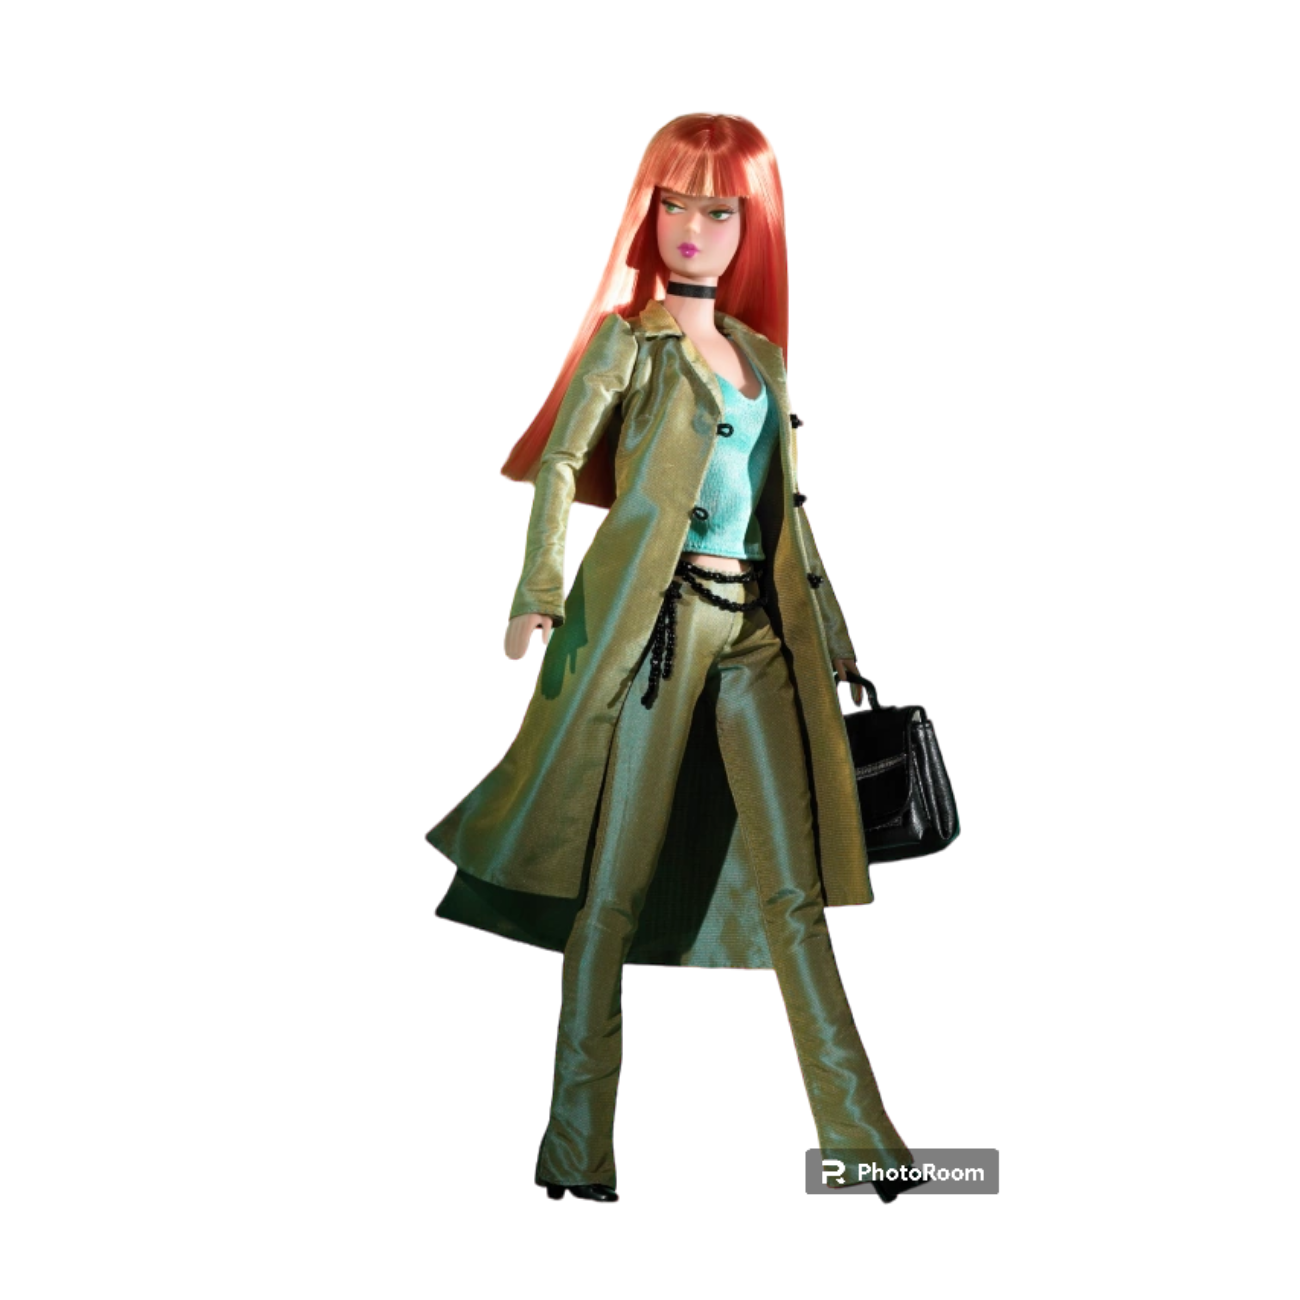 Producer Barbie doll wearing a green suit and carrying a black handbag with red hair